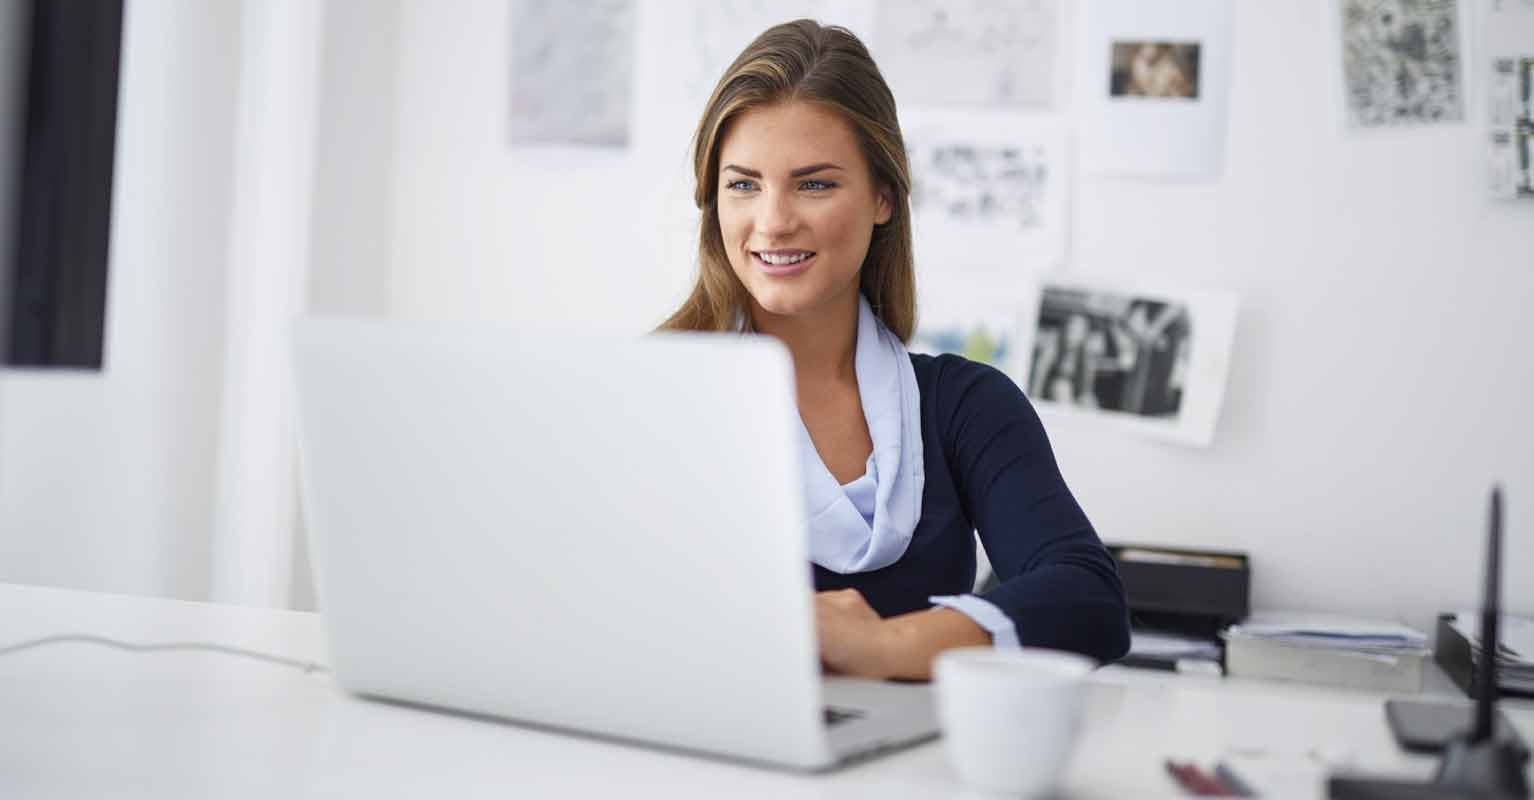 woman sitting at desk, looking at laptop computer and smiling